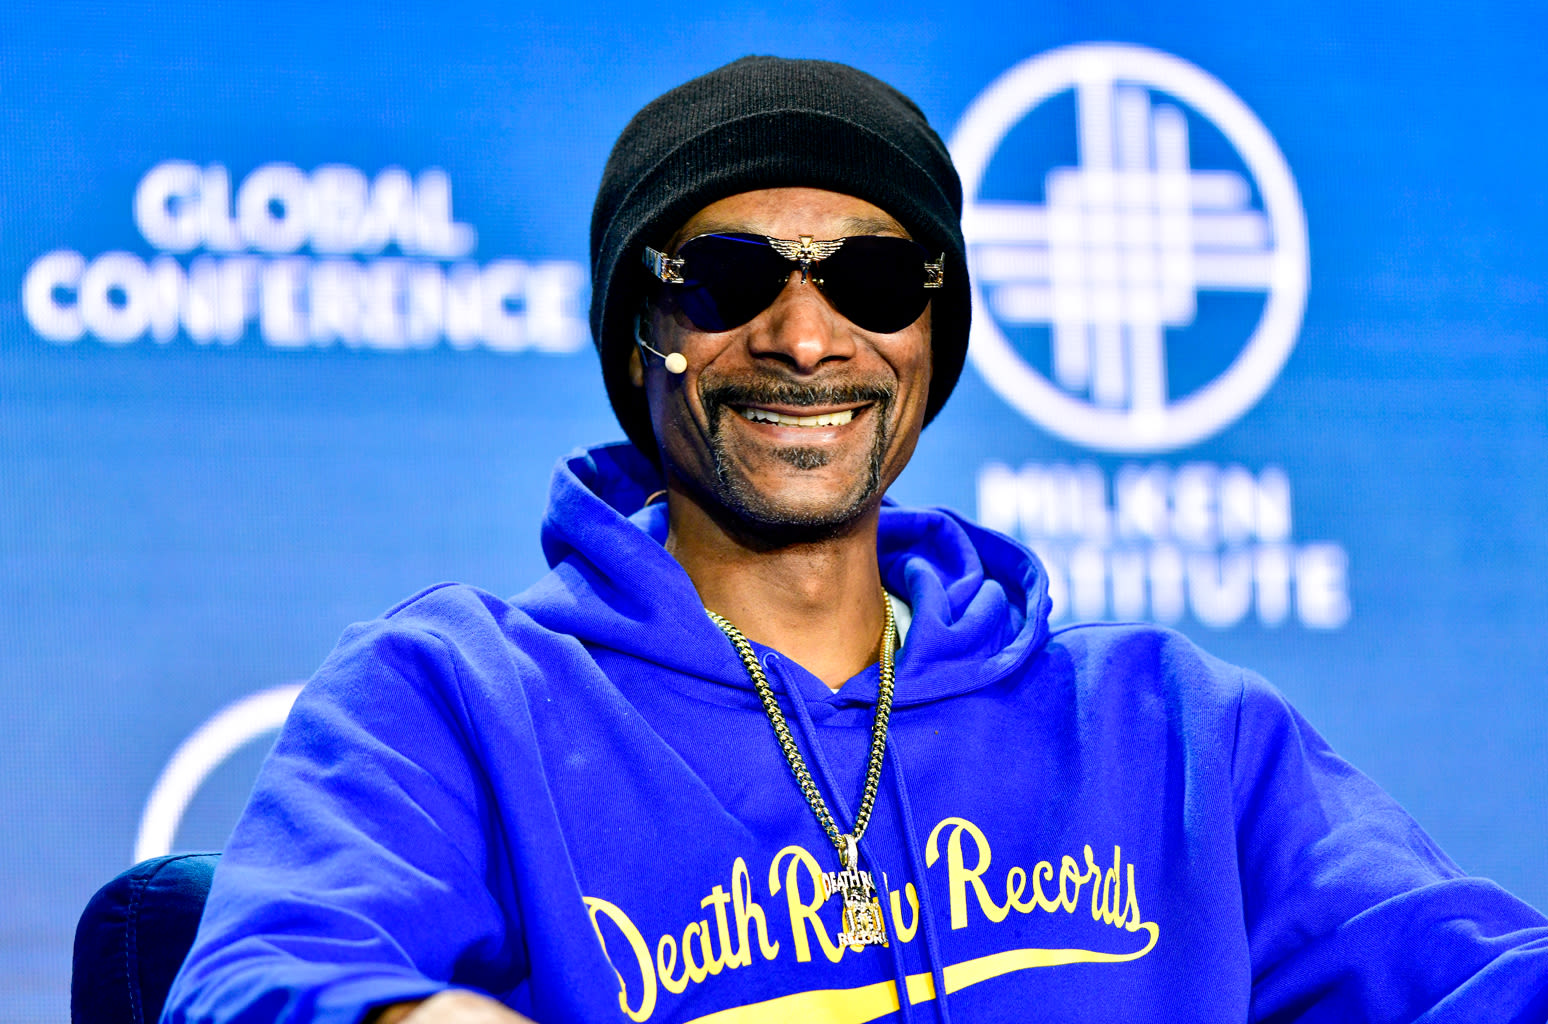 Snoop Dogg Joining ‘The Voice’ as Coach For Season 26 Alongside Fellow Newcomer Michael Bublé